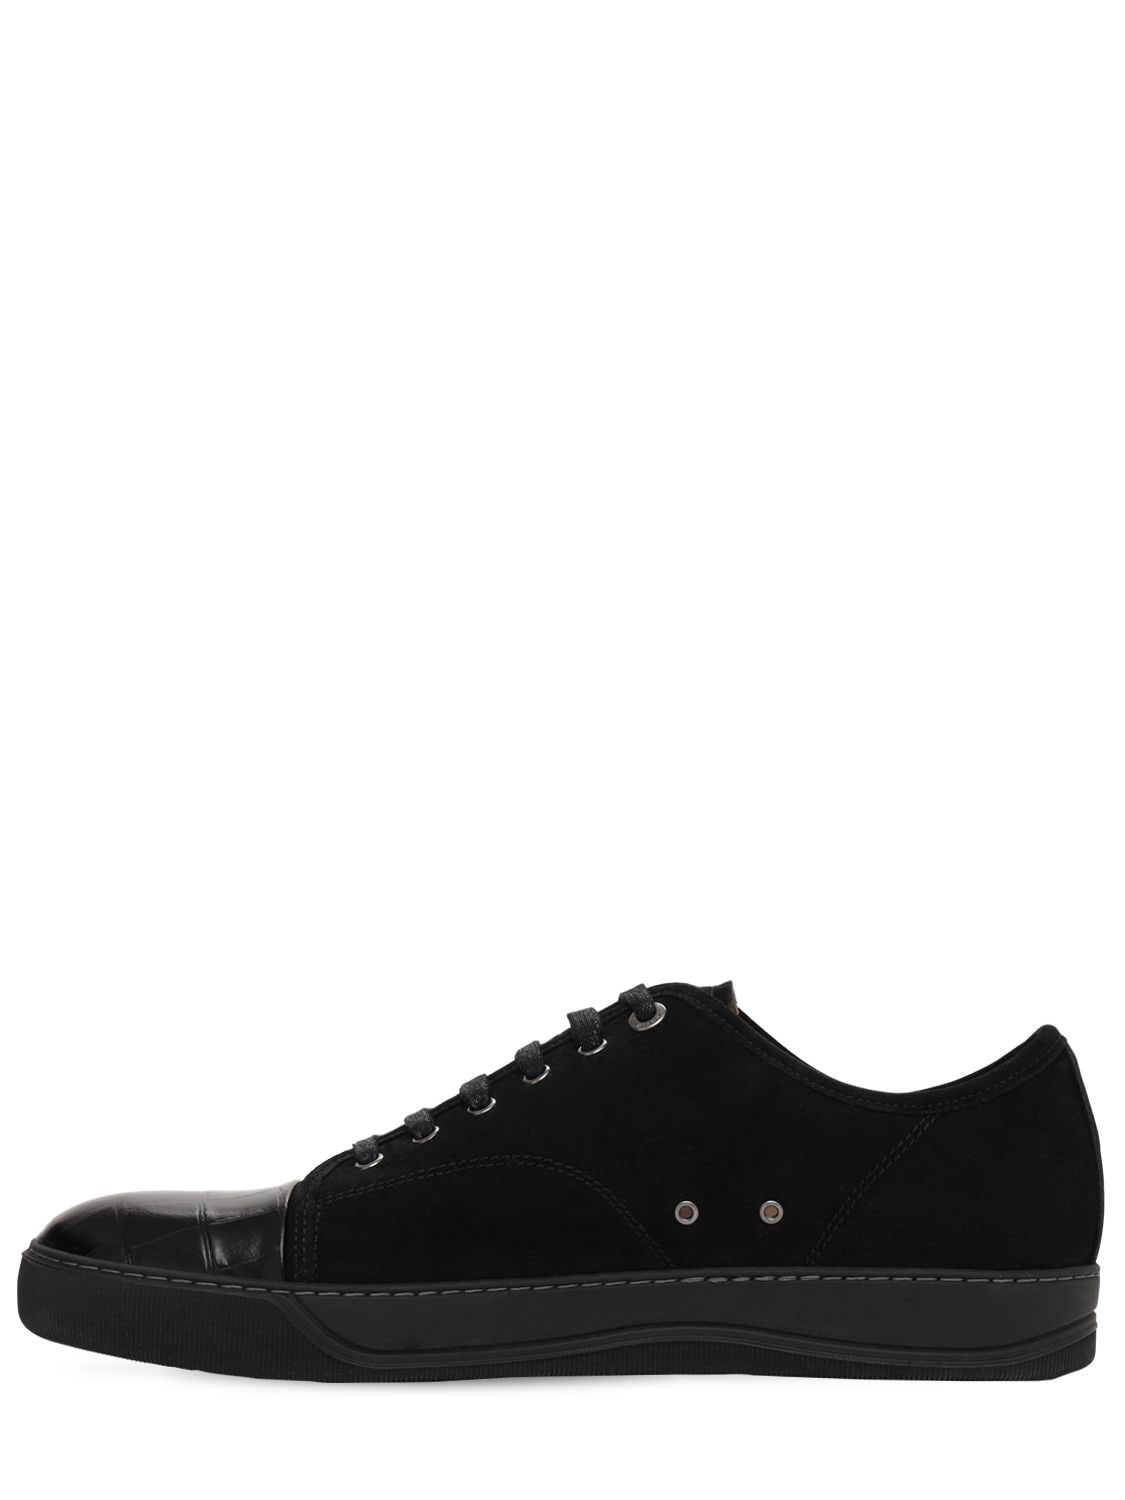 Lanvin Suede And Leather Cap-toe Sneakers In Black | ModeSens